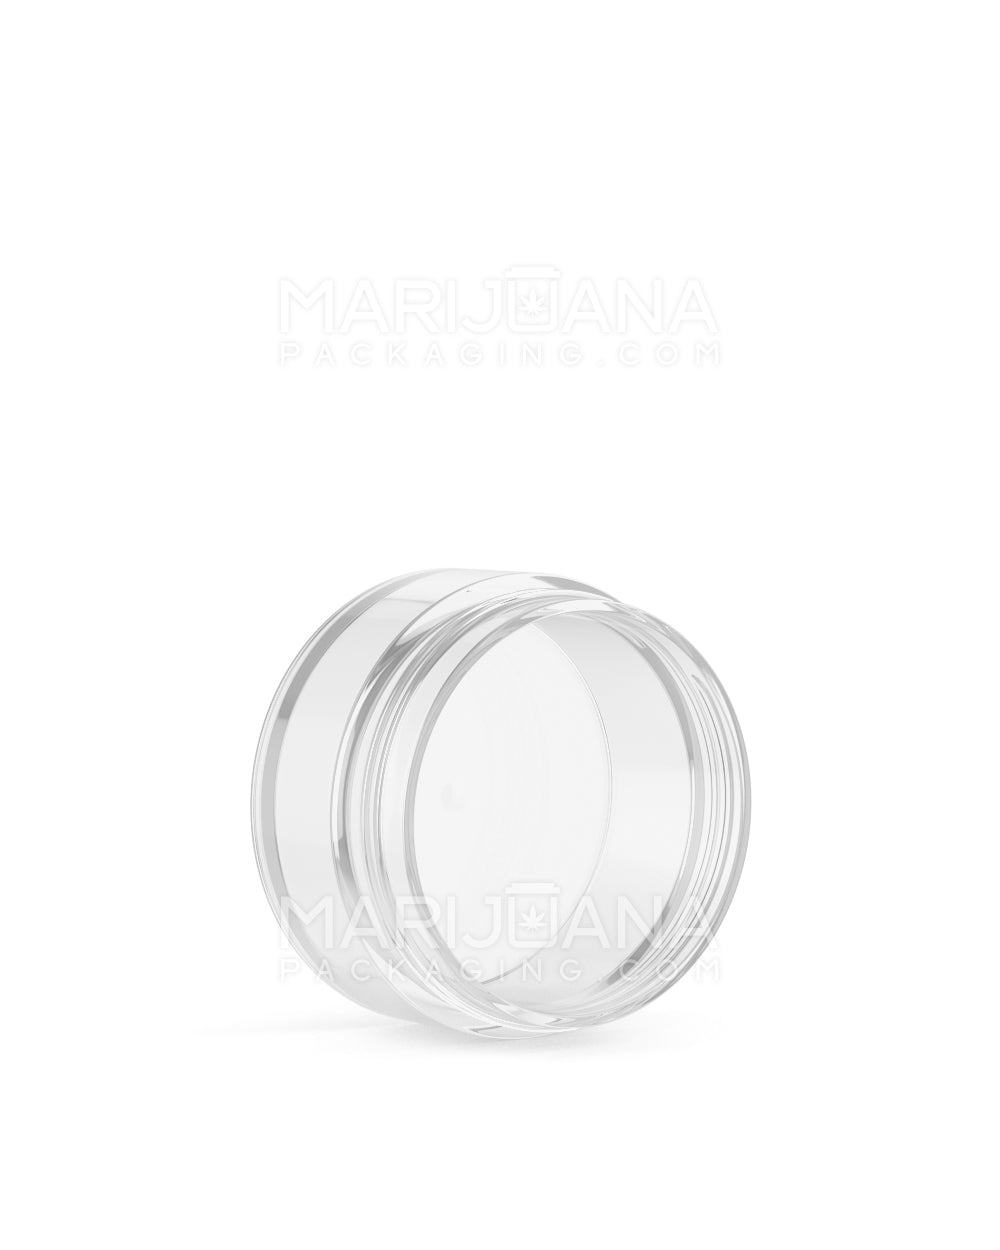 Clear Concentrate Containers w/ Screw Top Cap | 15mL - Plastic | Sample - 6